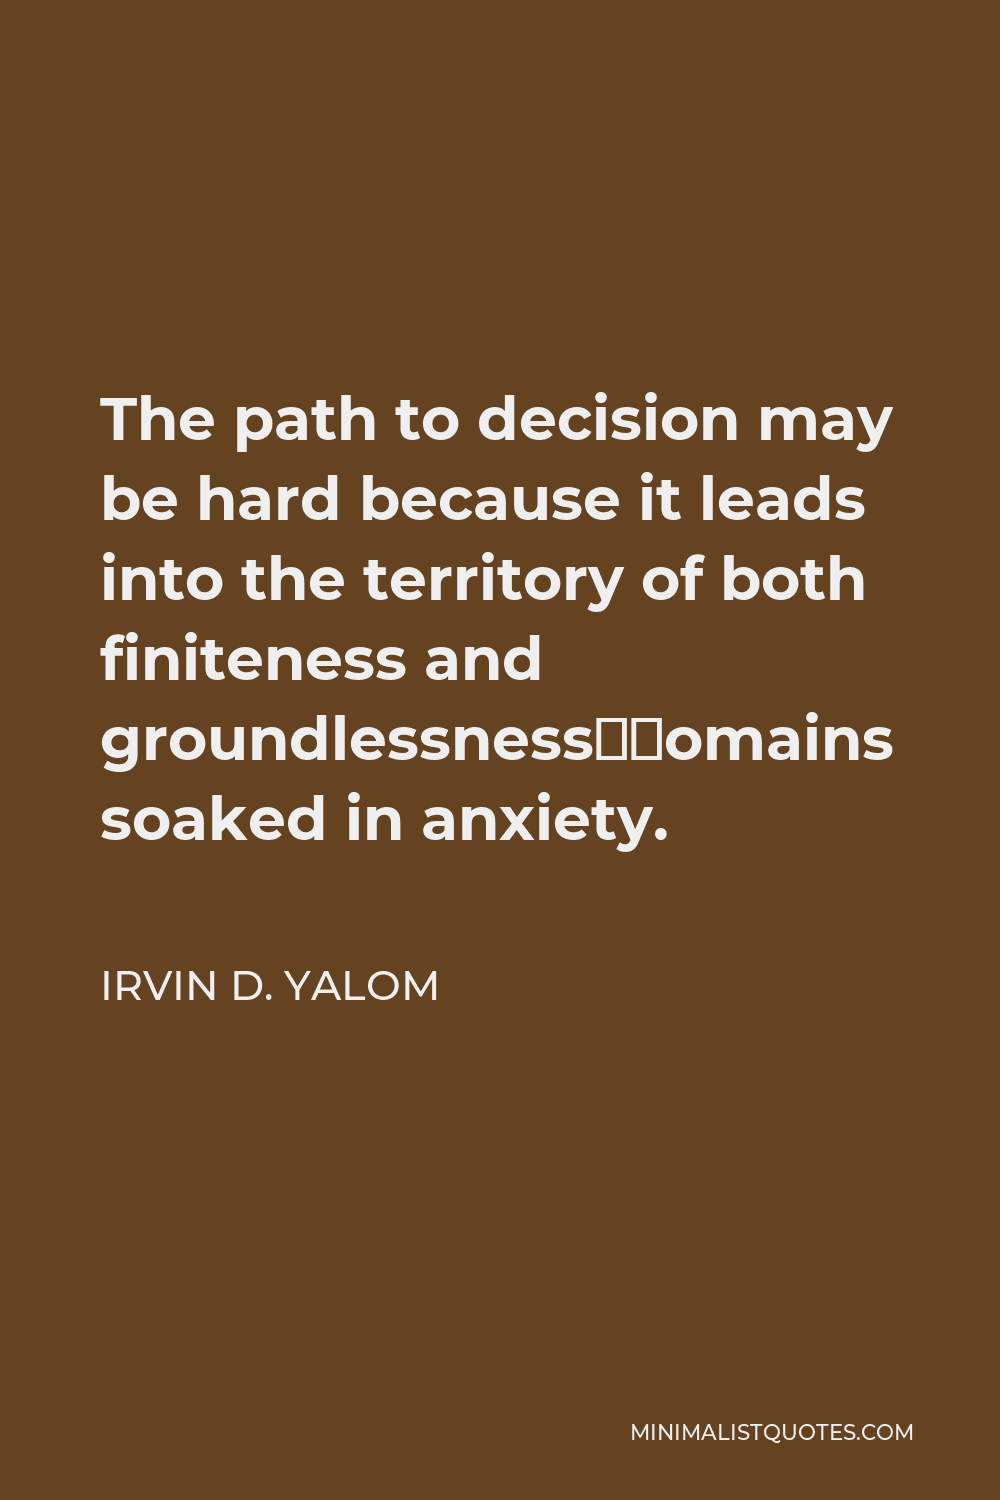 Irvin D. Yalom Quote - The path to decision may be hard because it leads into the territory of both finiteness and groundlessness—domains soaked in anxiety.